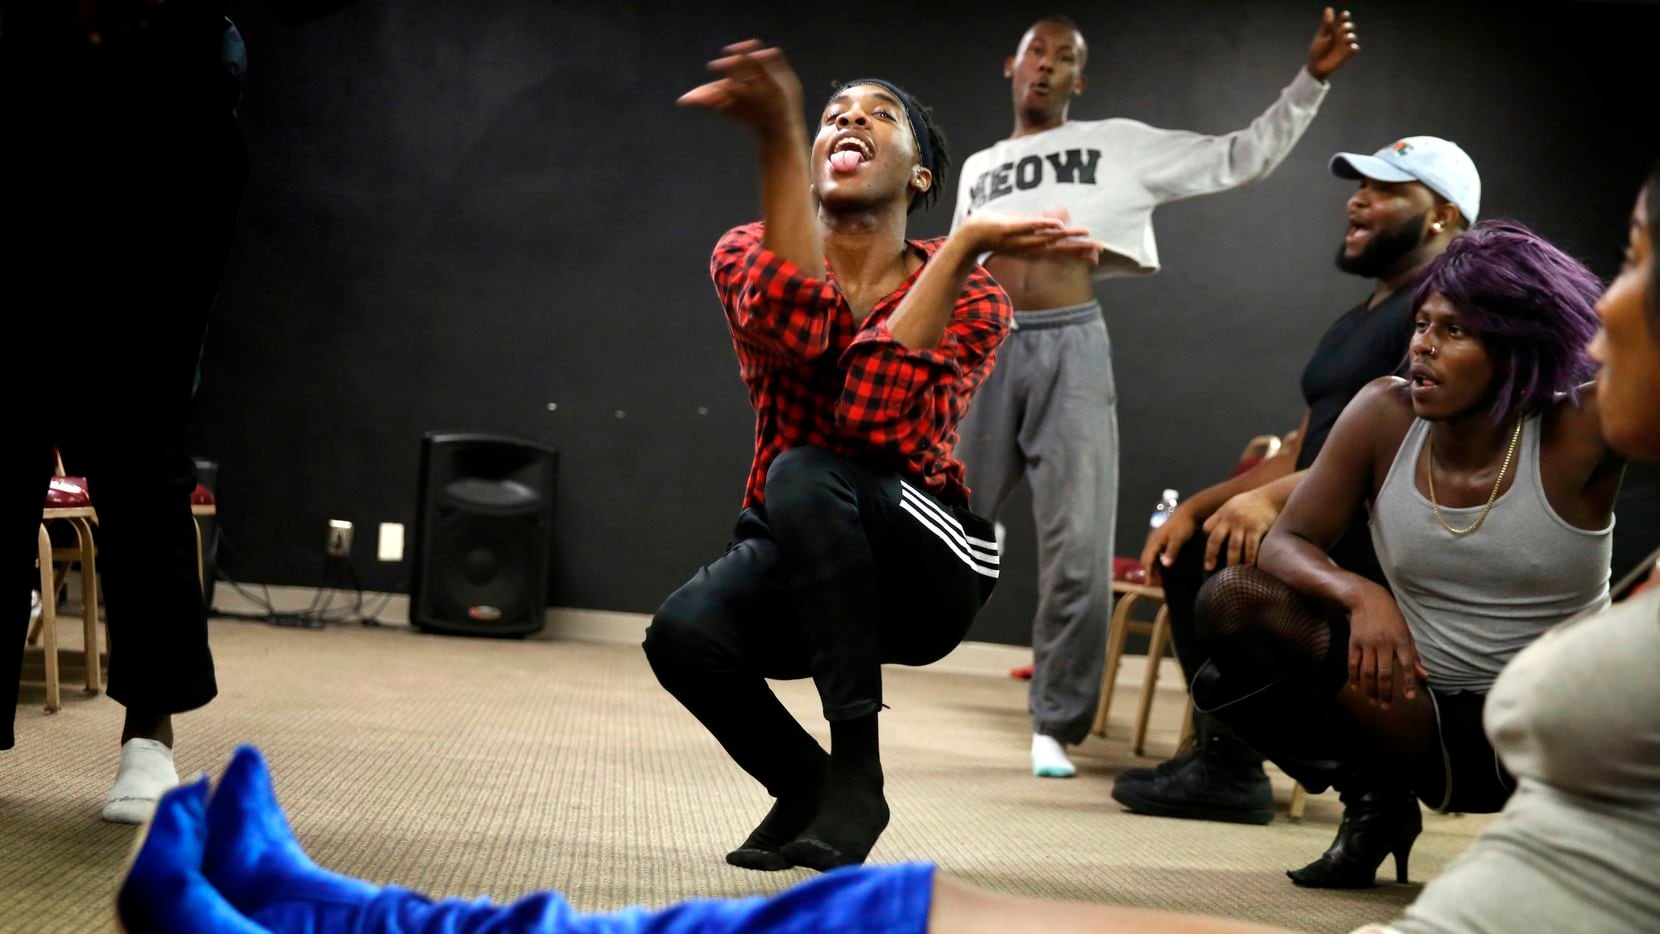 Leondrae Frank (center) vogues with others during a voguing practice at United Black Ellument in Dallas on Aug. 10, 2018. (Rose Baca/The Dallas Morning News)
